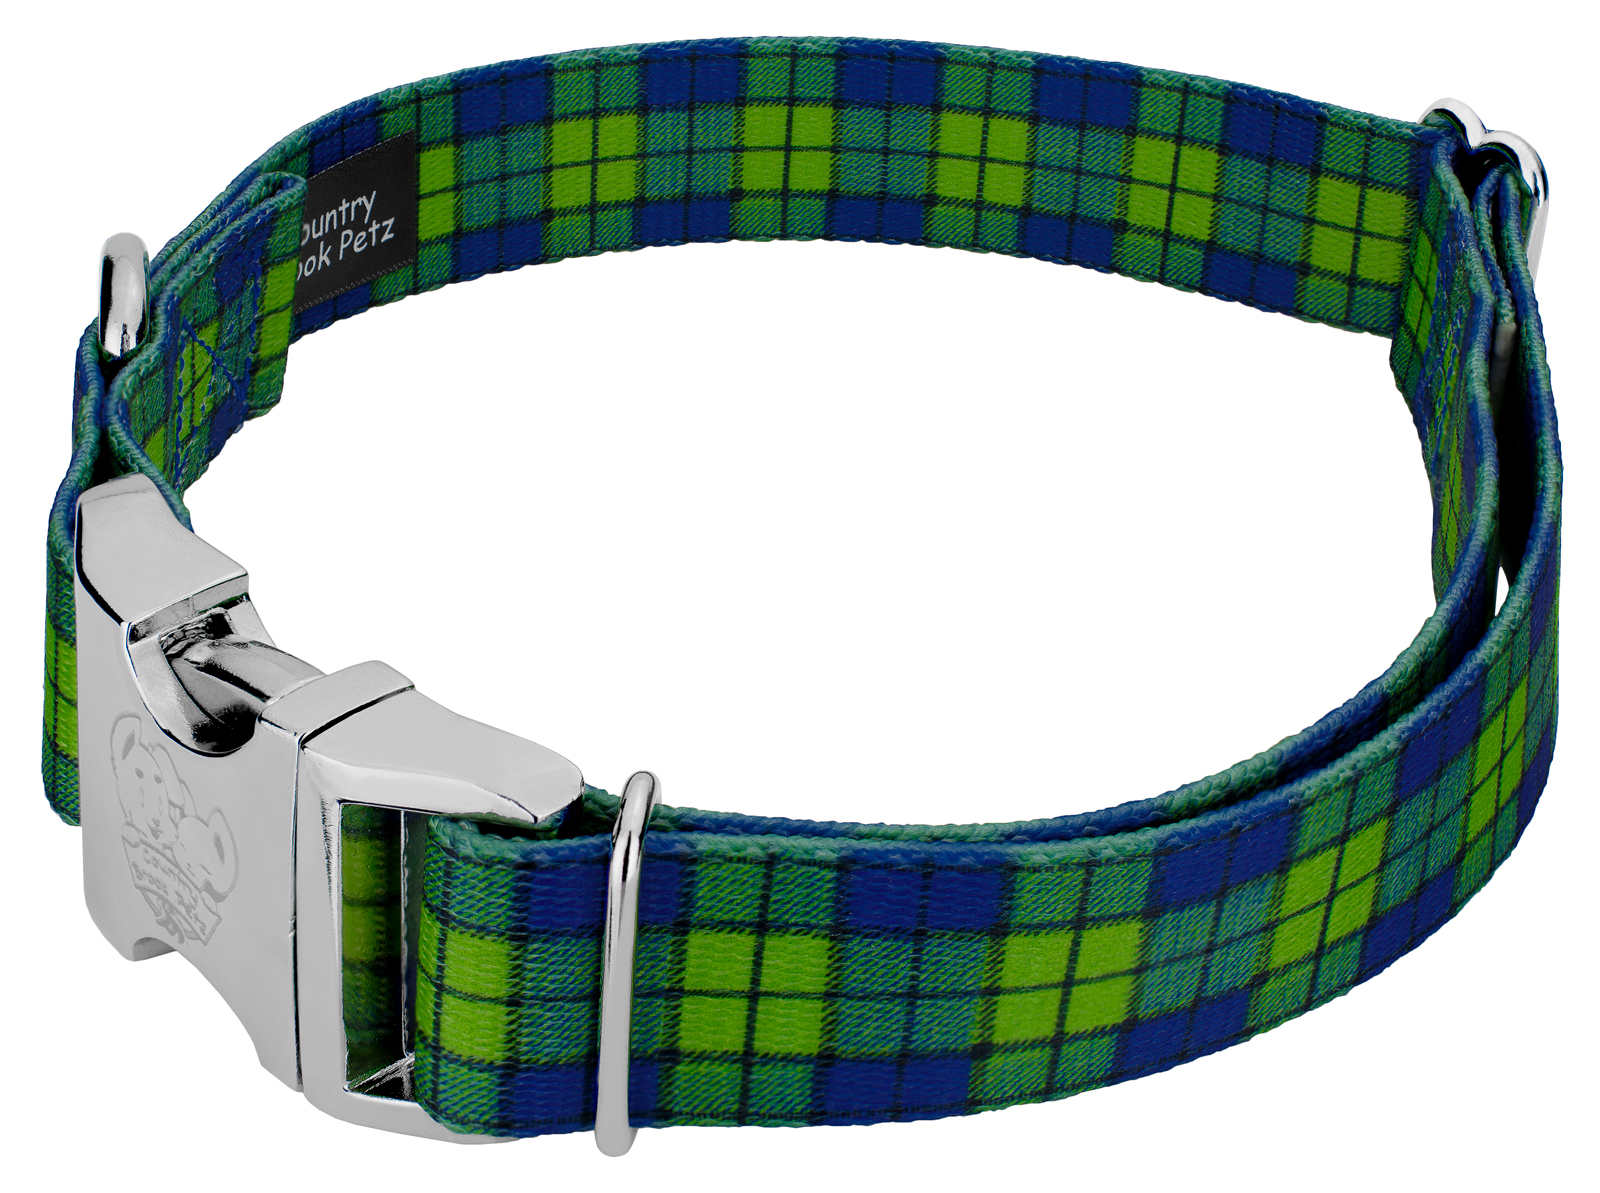 Country Brook Petz® Premium Blue and Green Plaid Dog Collar and Leash, Extra Large - image 3 of 6